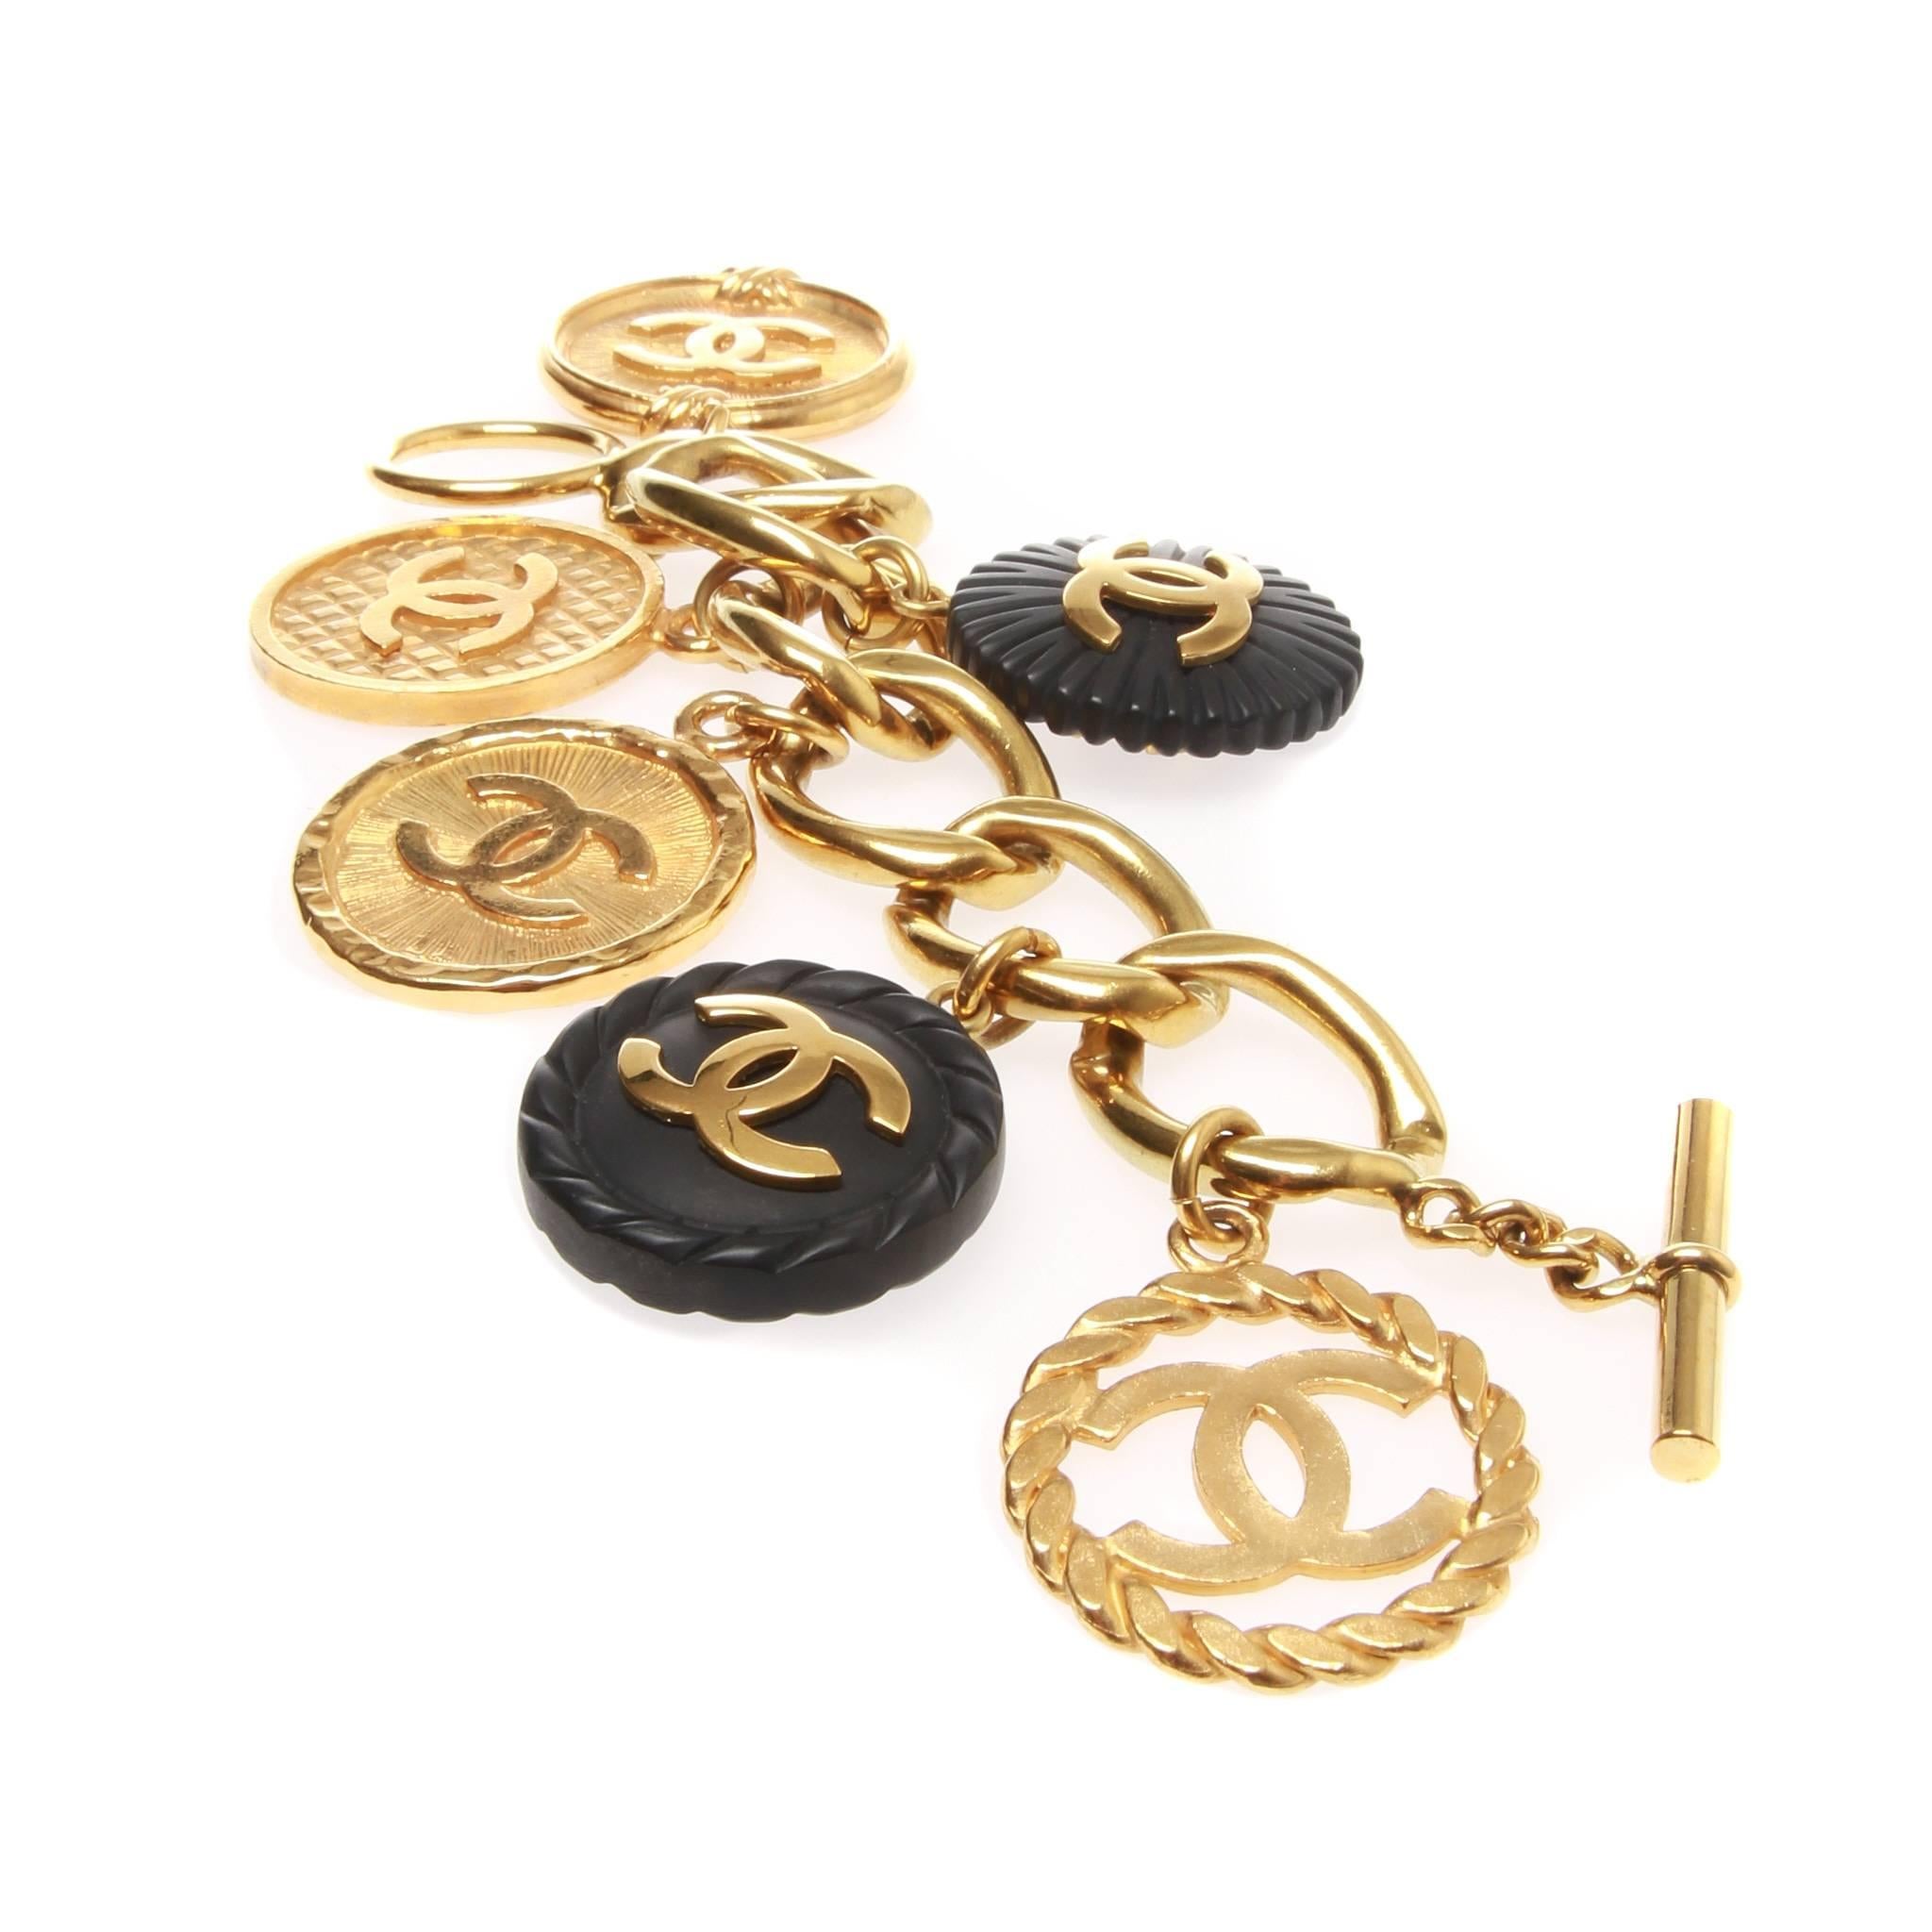 Rare 90's Vintage Chanel Iconic Interlocking CC Charm Bracelet

A stunning rare Chanel cuff featuring the iconic interlocking CC charms.

This piece features a thick and shiny chain of large gold-tone flattened oval links and six swaying charms that